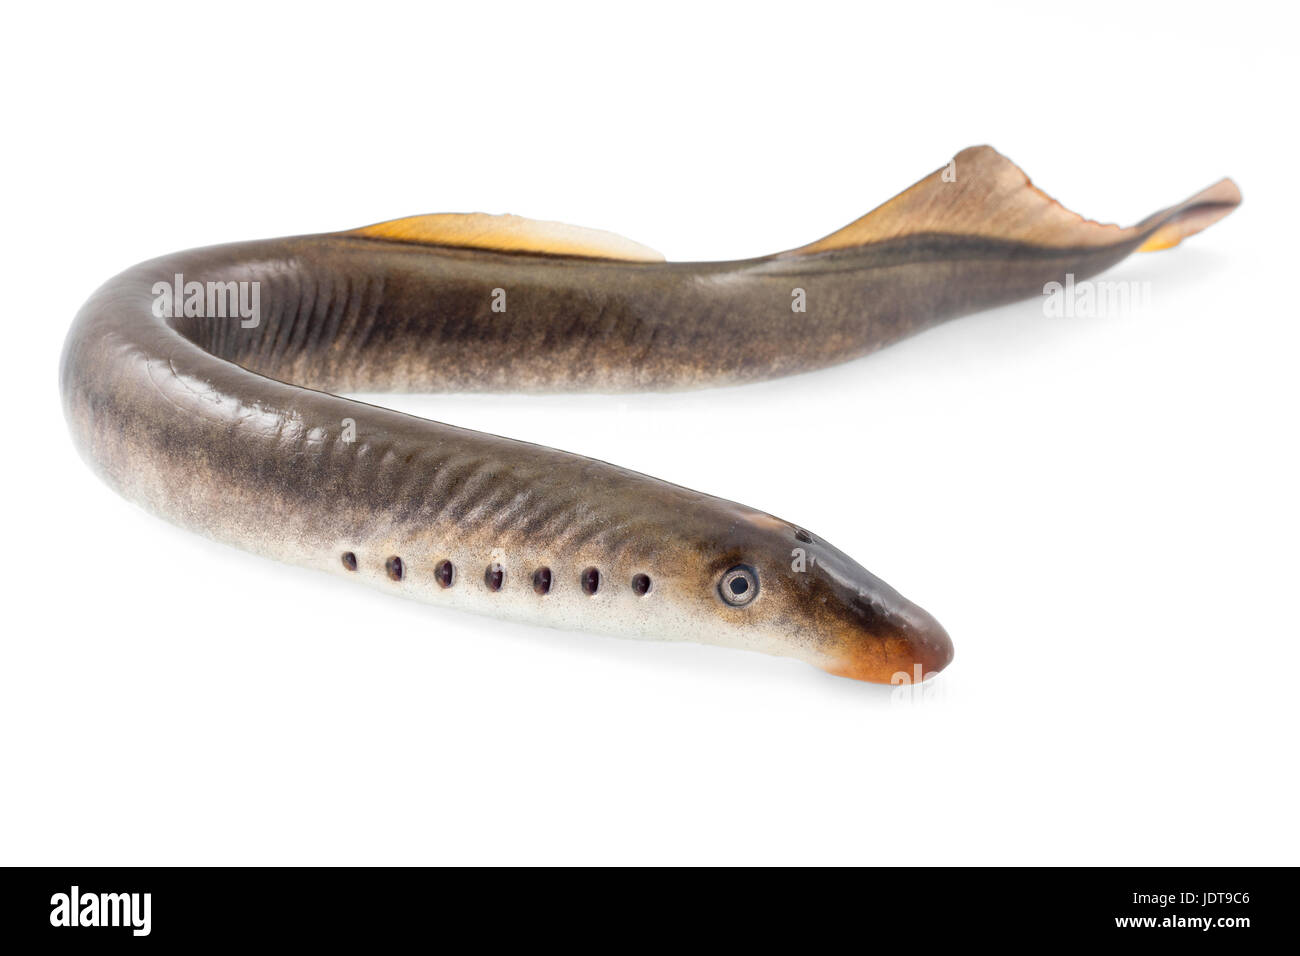 River lamprey on a white background Stock Photo